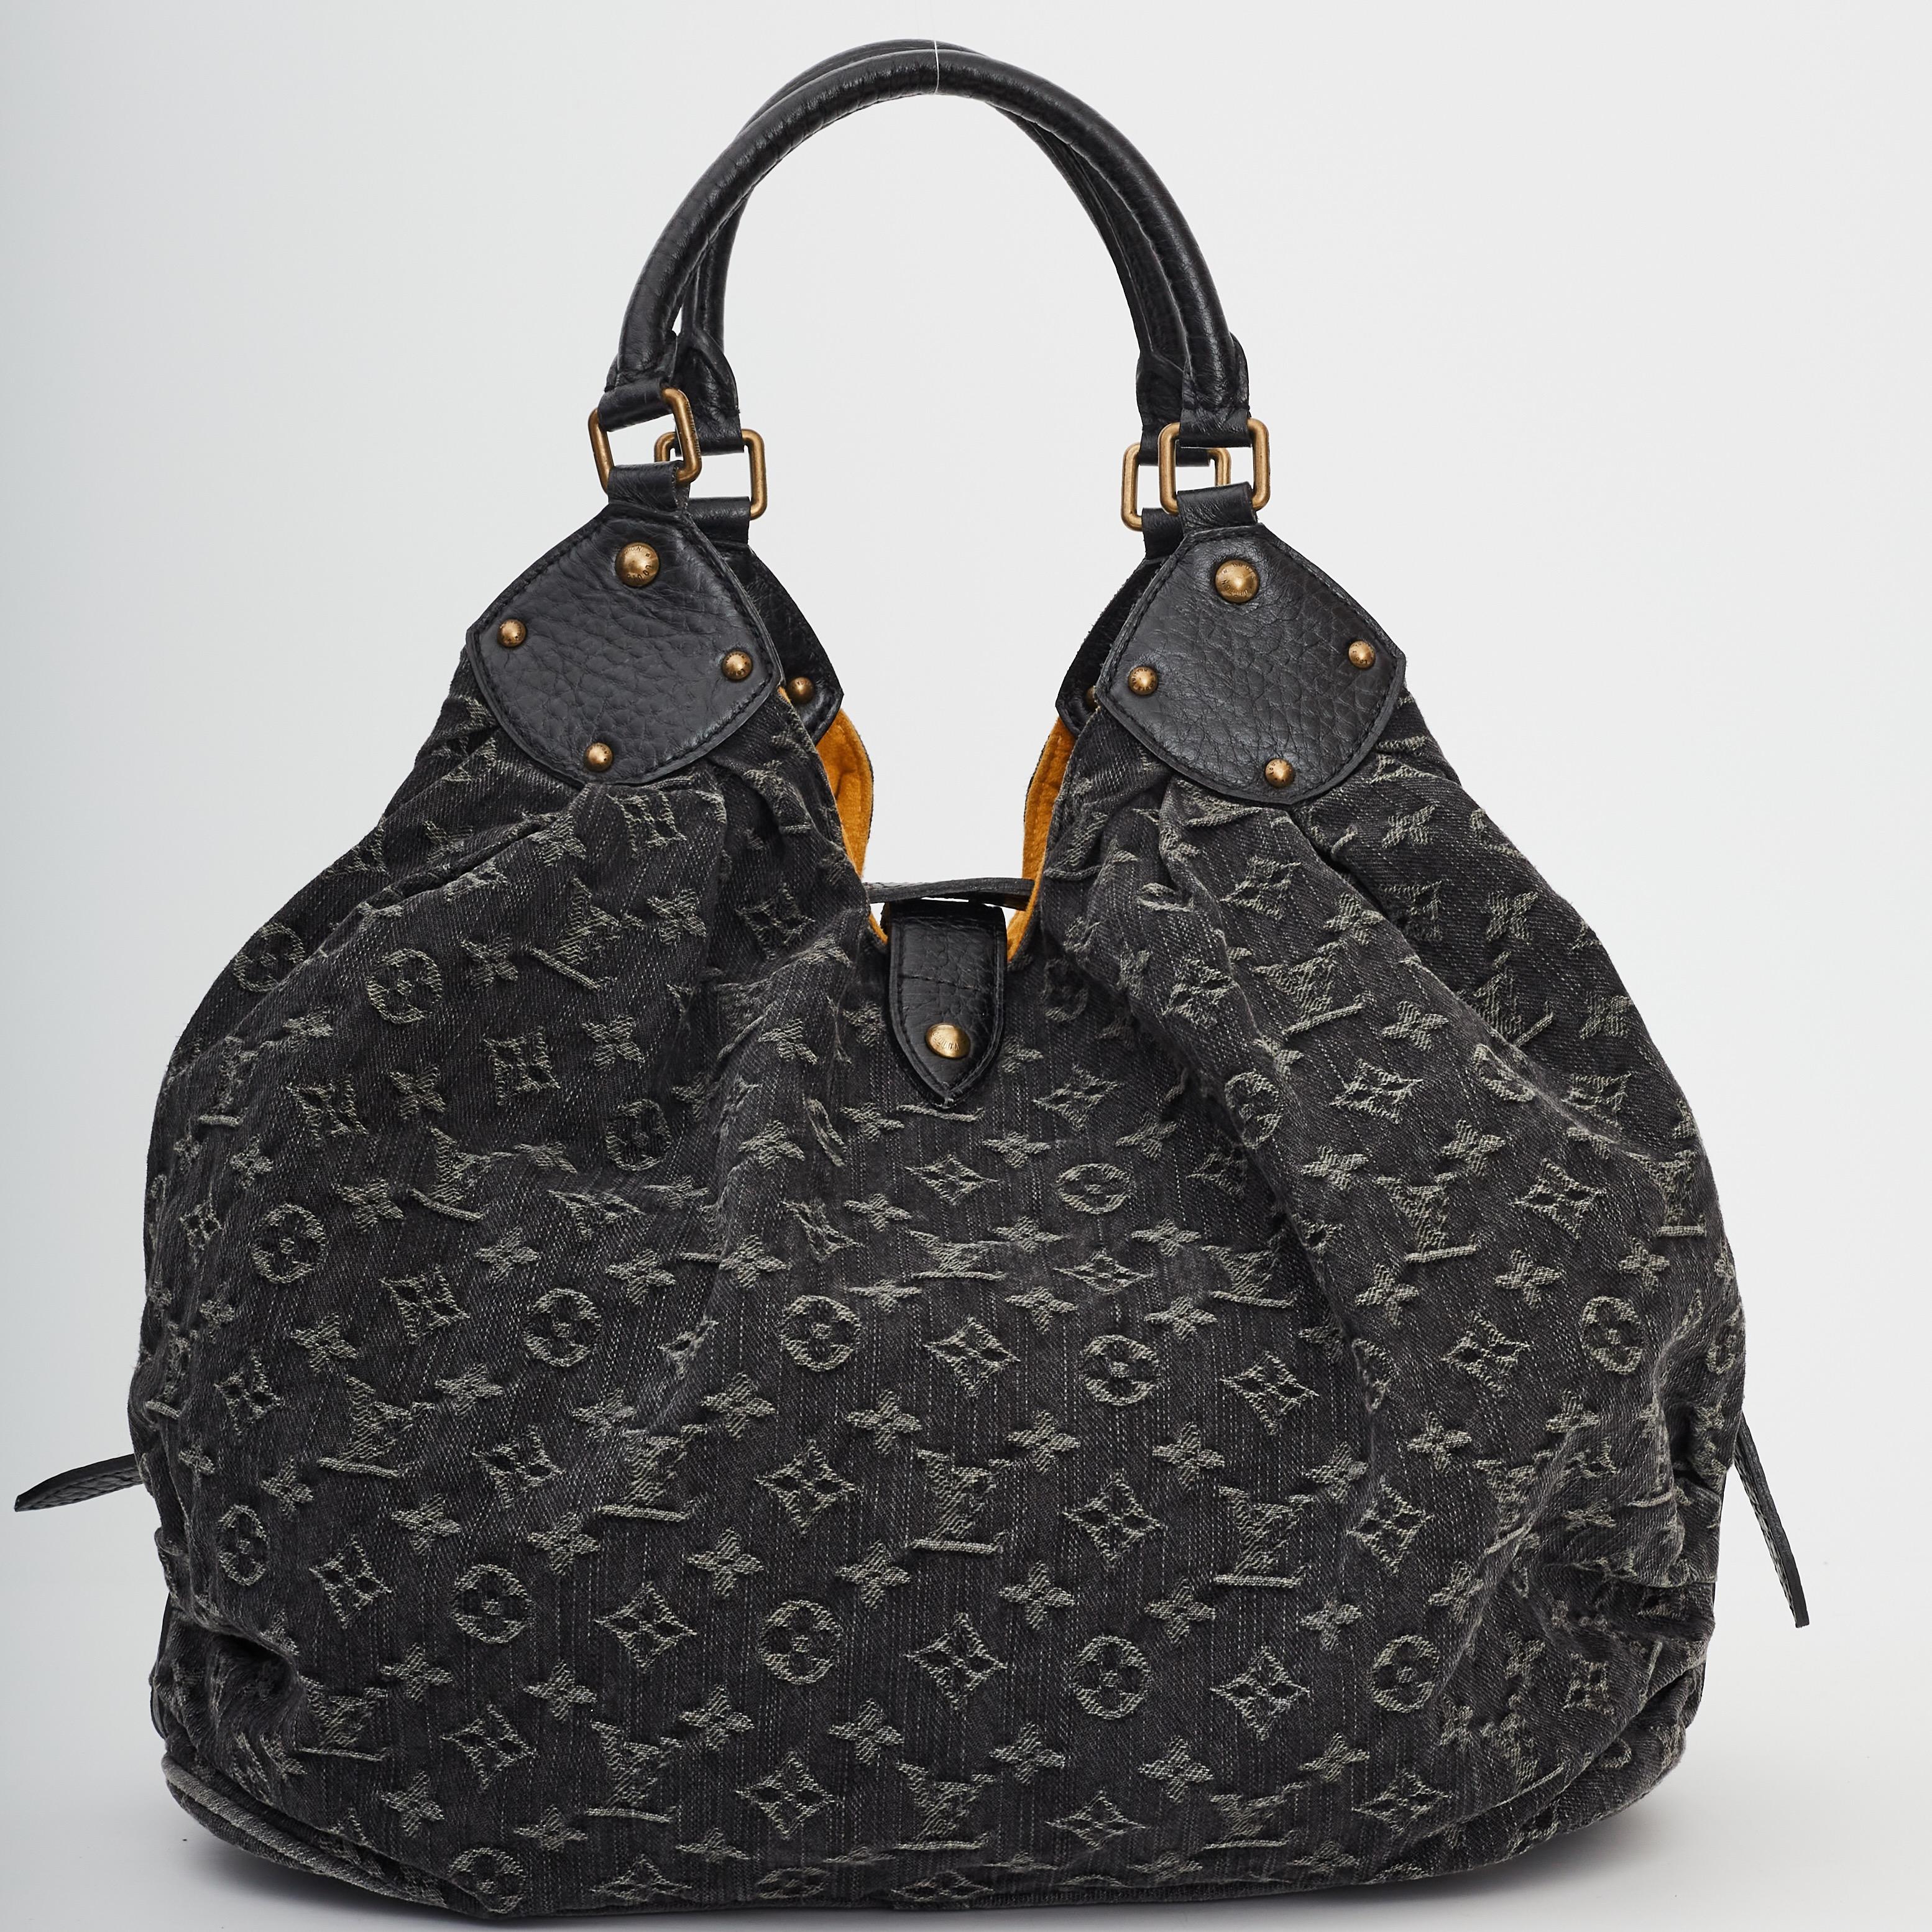 This Mahina bag is made of black supple denim with the classic Louis Vuitton monogram. It is gathered at both sides with a draped effect supported with black leather trim and rolled leather handles. The brass hardware is bold and features a